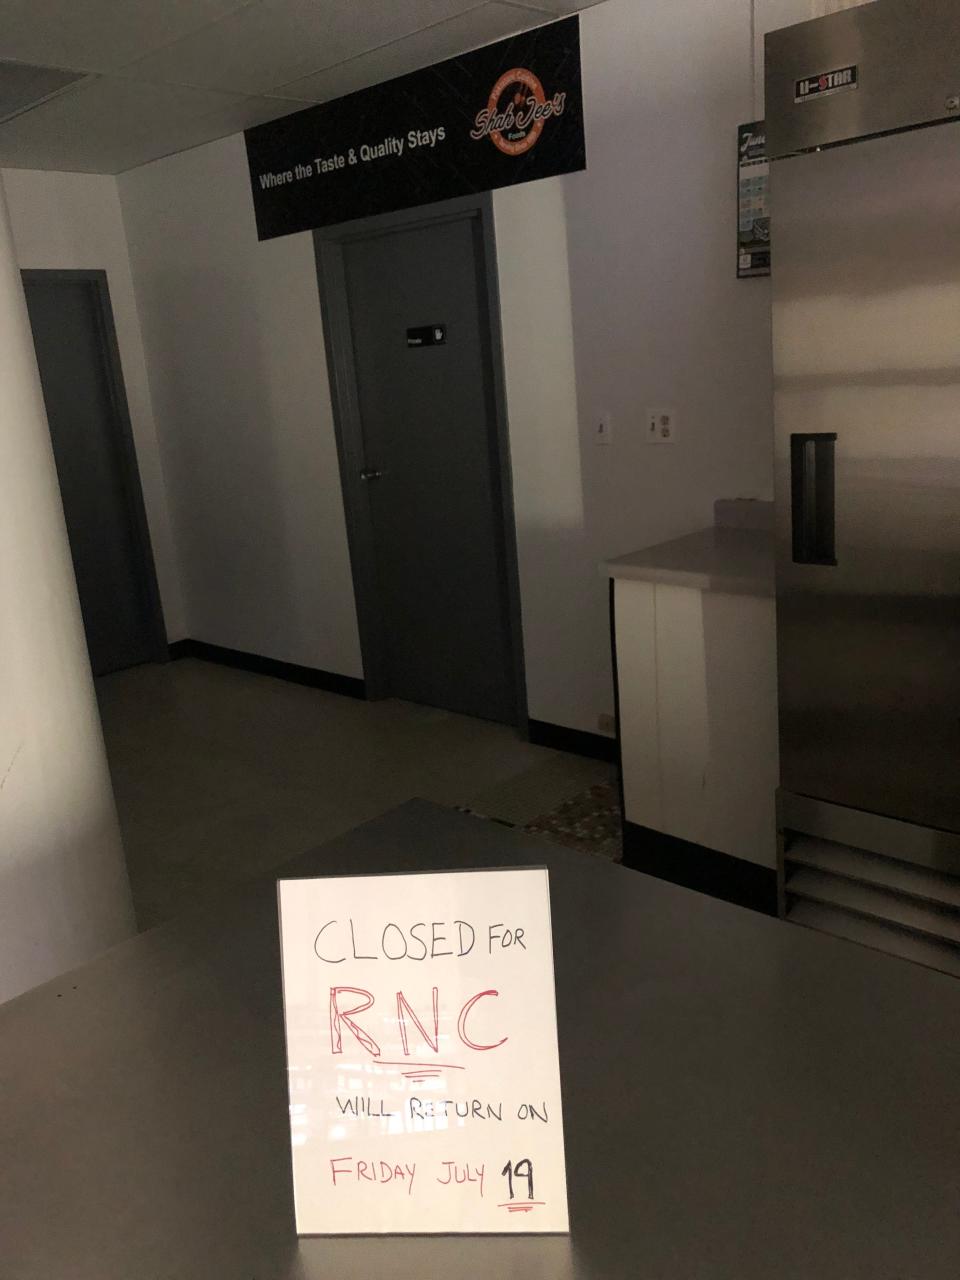 Some east side downtown businesses are closed for the RNC including two eateries which operate in the lower level of an office building at 770 N. Jefferson St.: Shah Jee, a Pakistani restaurant, and Midwest Sad, which includes breakfast items and desserts on its menu.